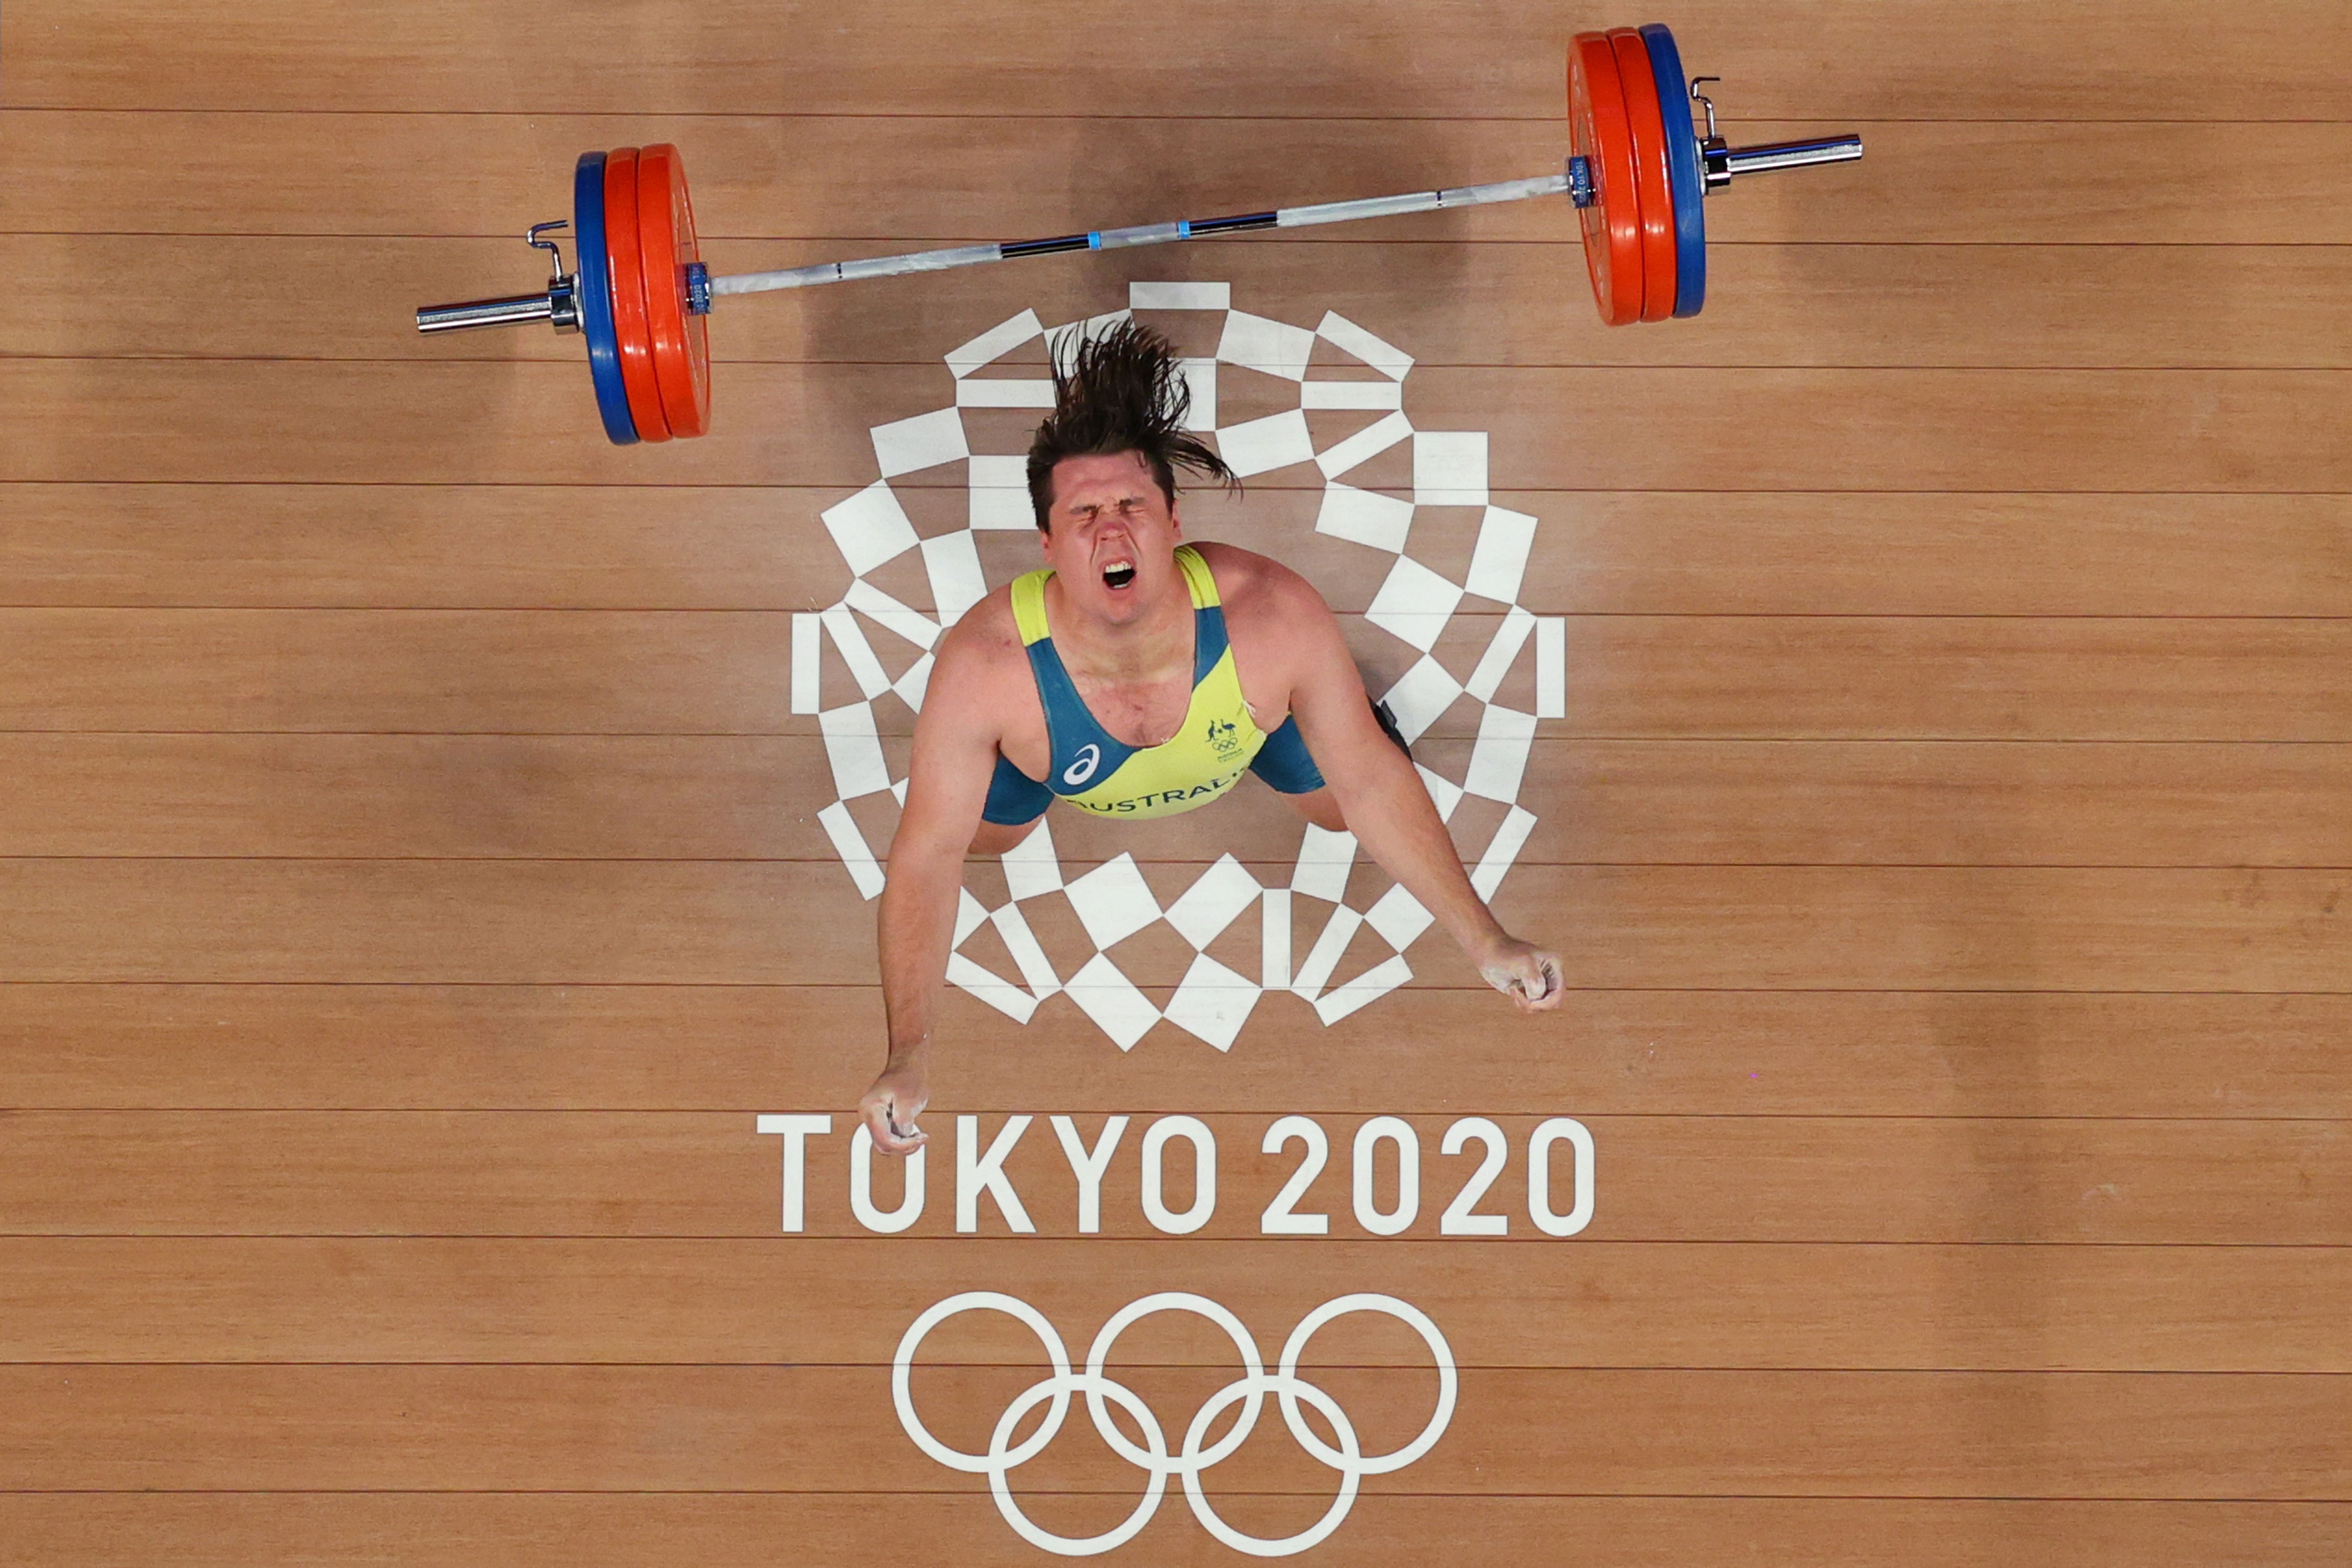 Australia's Matthew Ryan Lydement reacts after missing an attempt during the men's 109kg weightlifting competition during the Tokyo 2020 Olympic Games